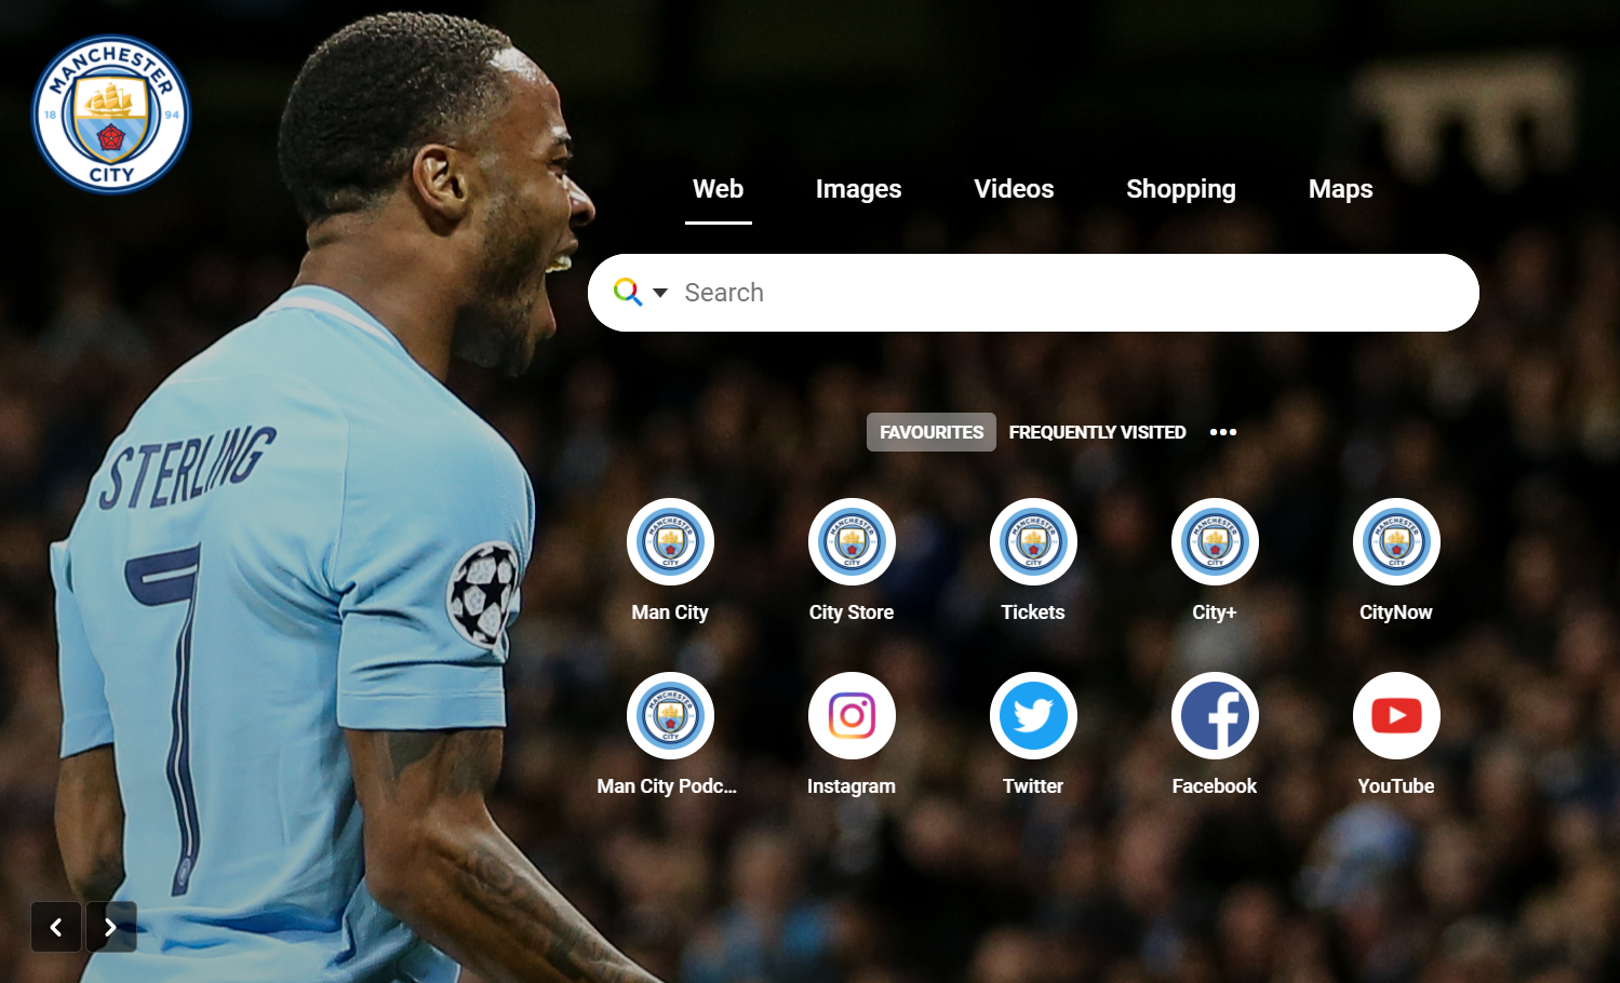 New Wallpapers in the Official Man City Google Start Page